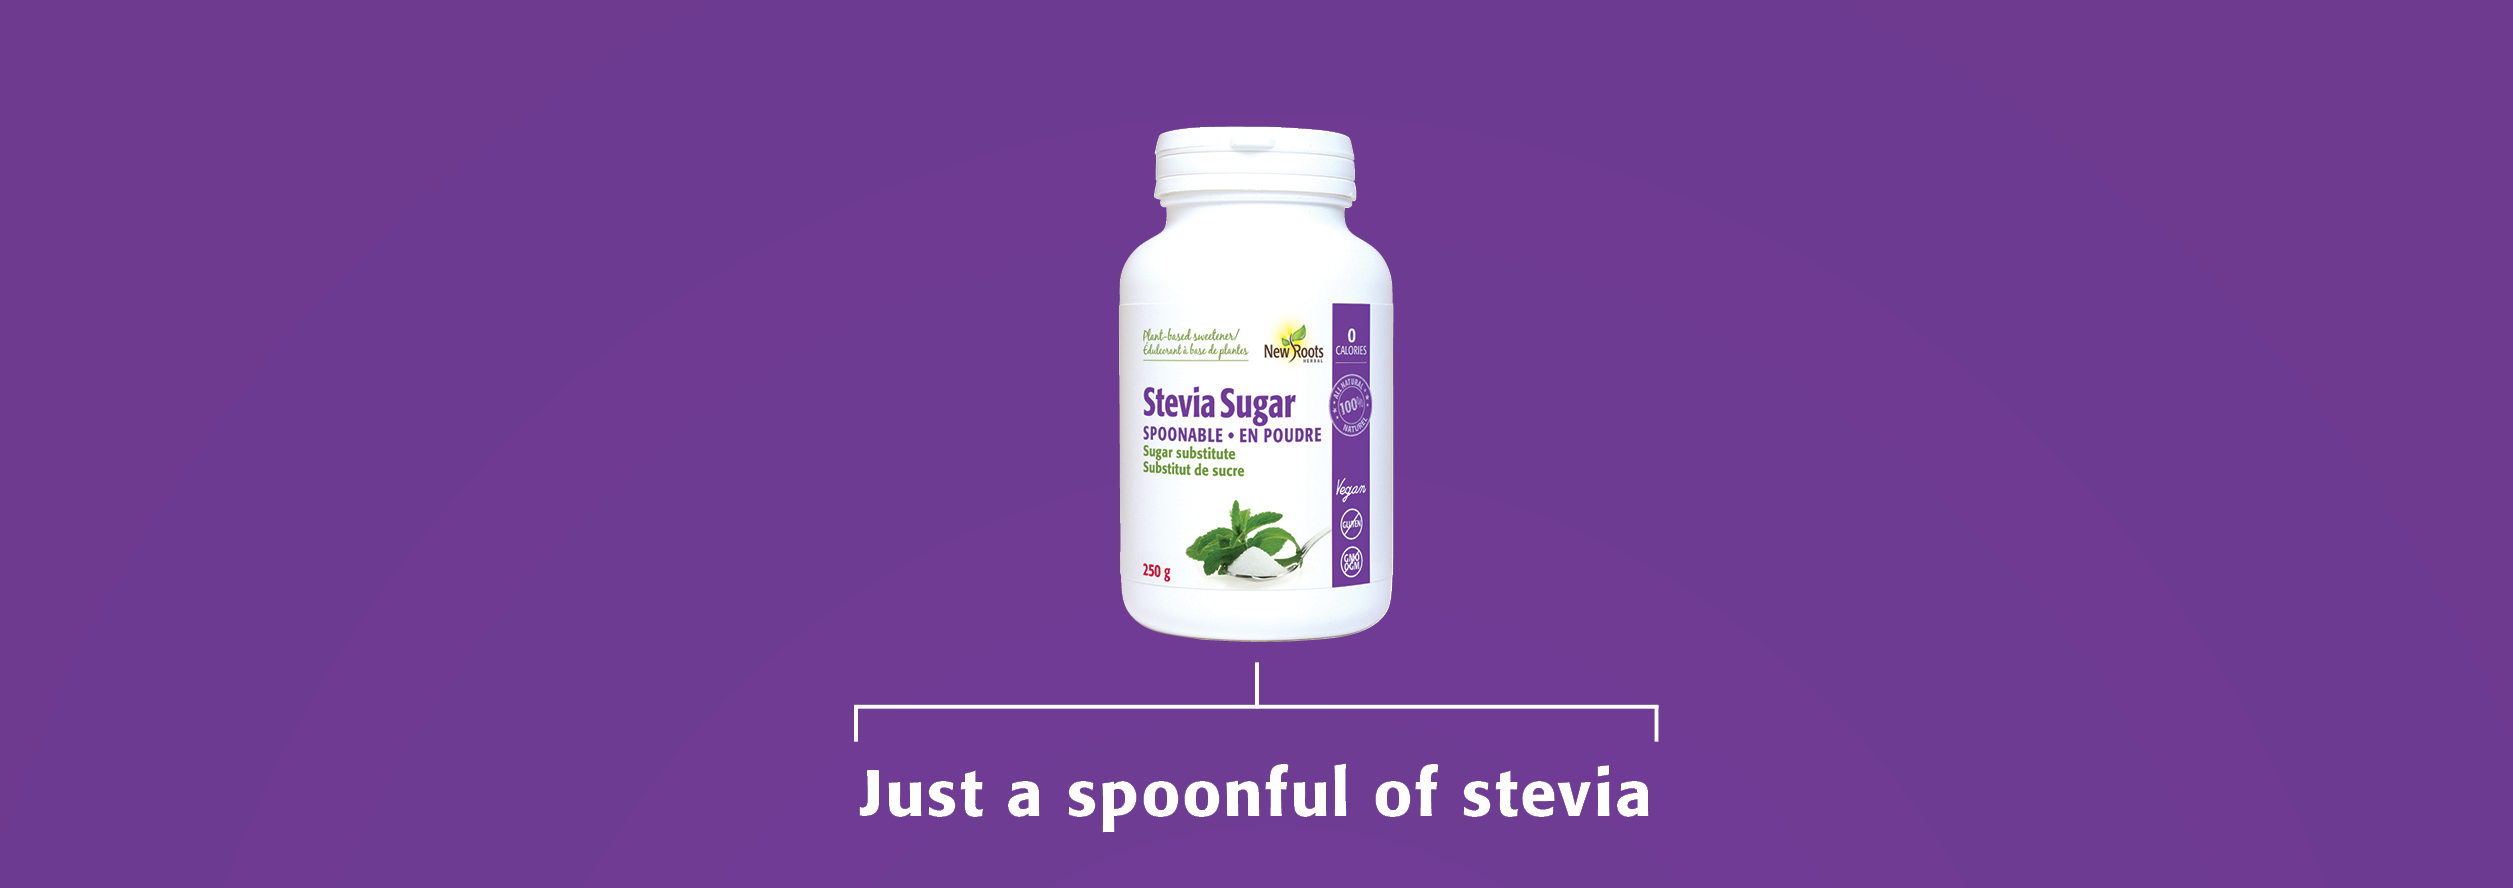 Just a spoonful of stevia